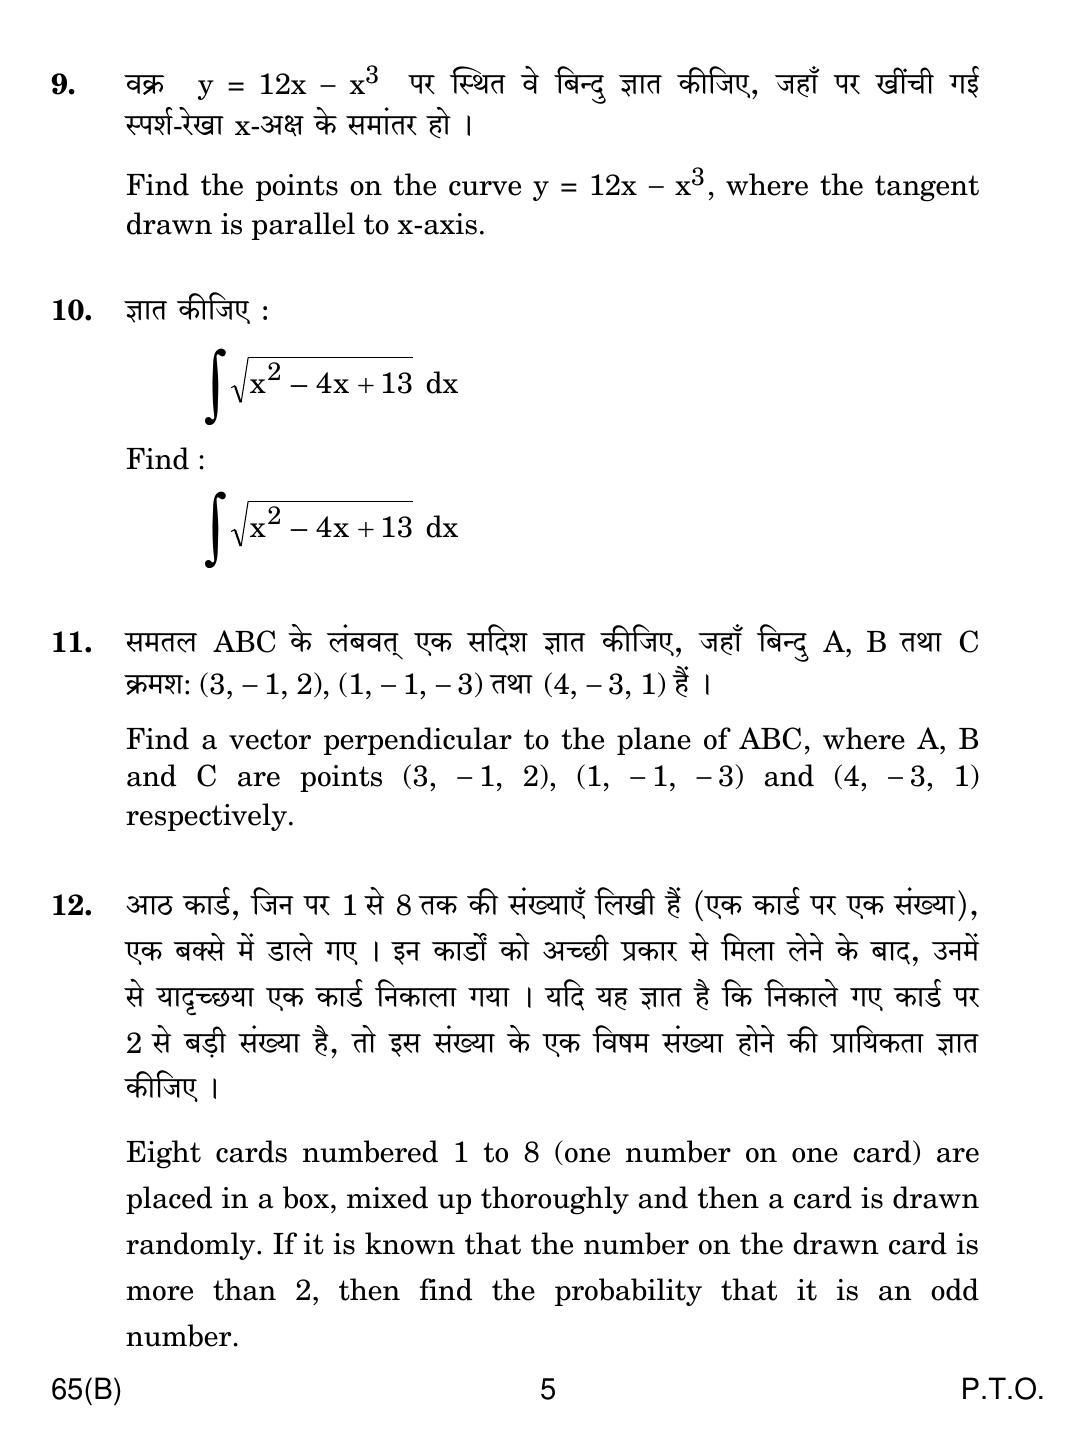 CBSE Class 12 65(B) MATHS FOR BLIND CANDIDATES 2018 Question Paper - Page 5